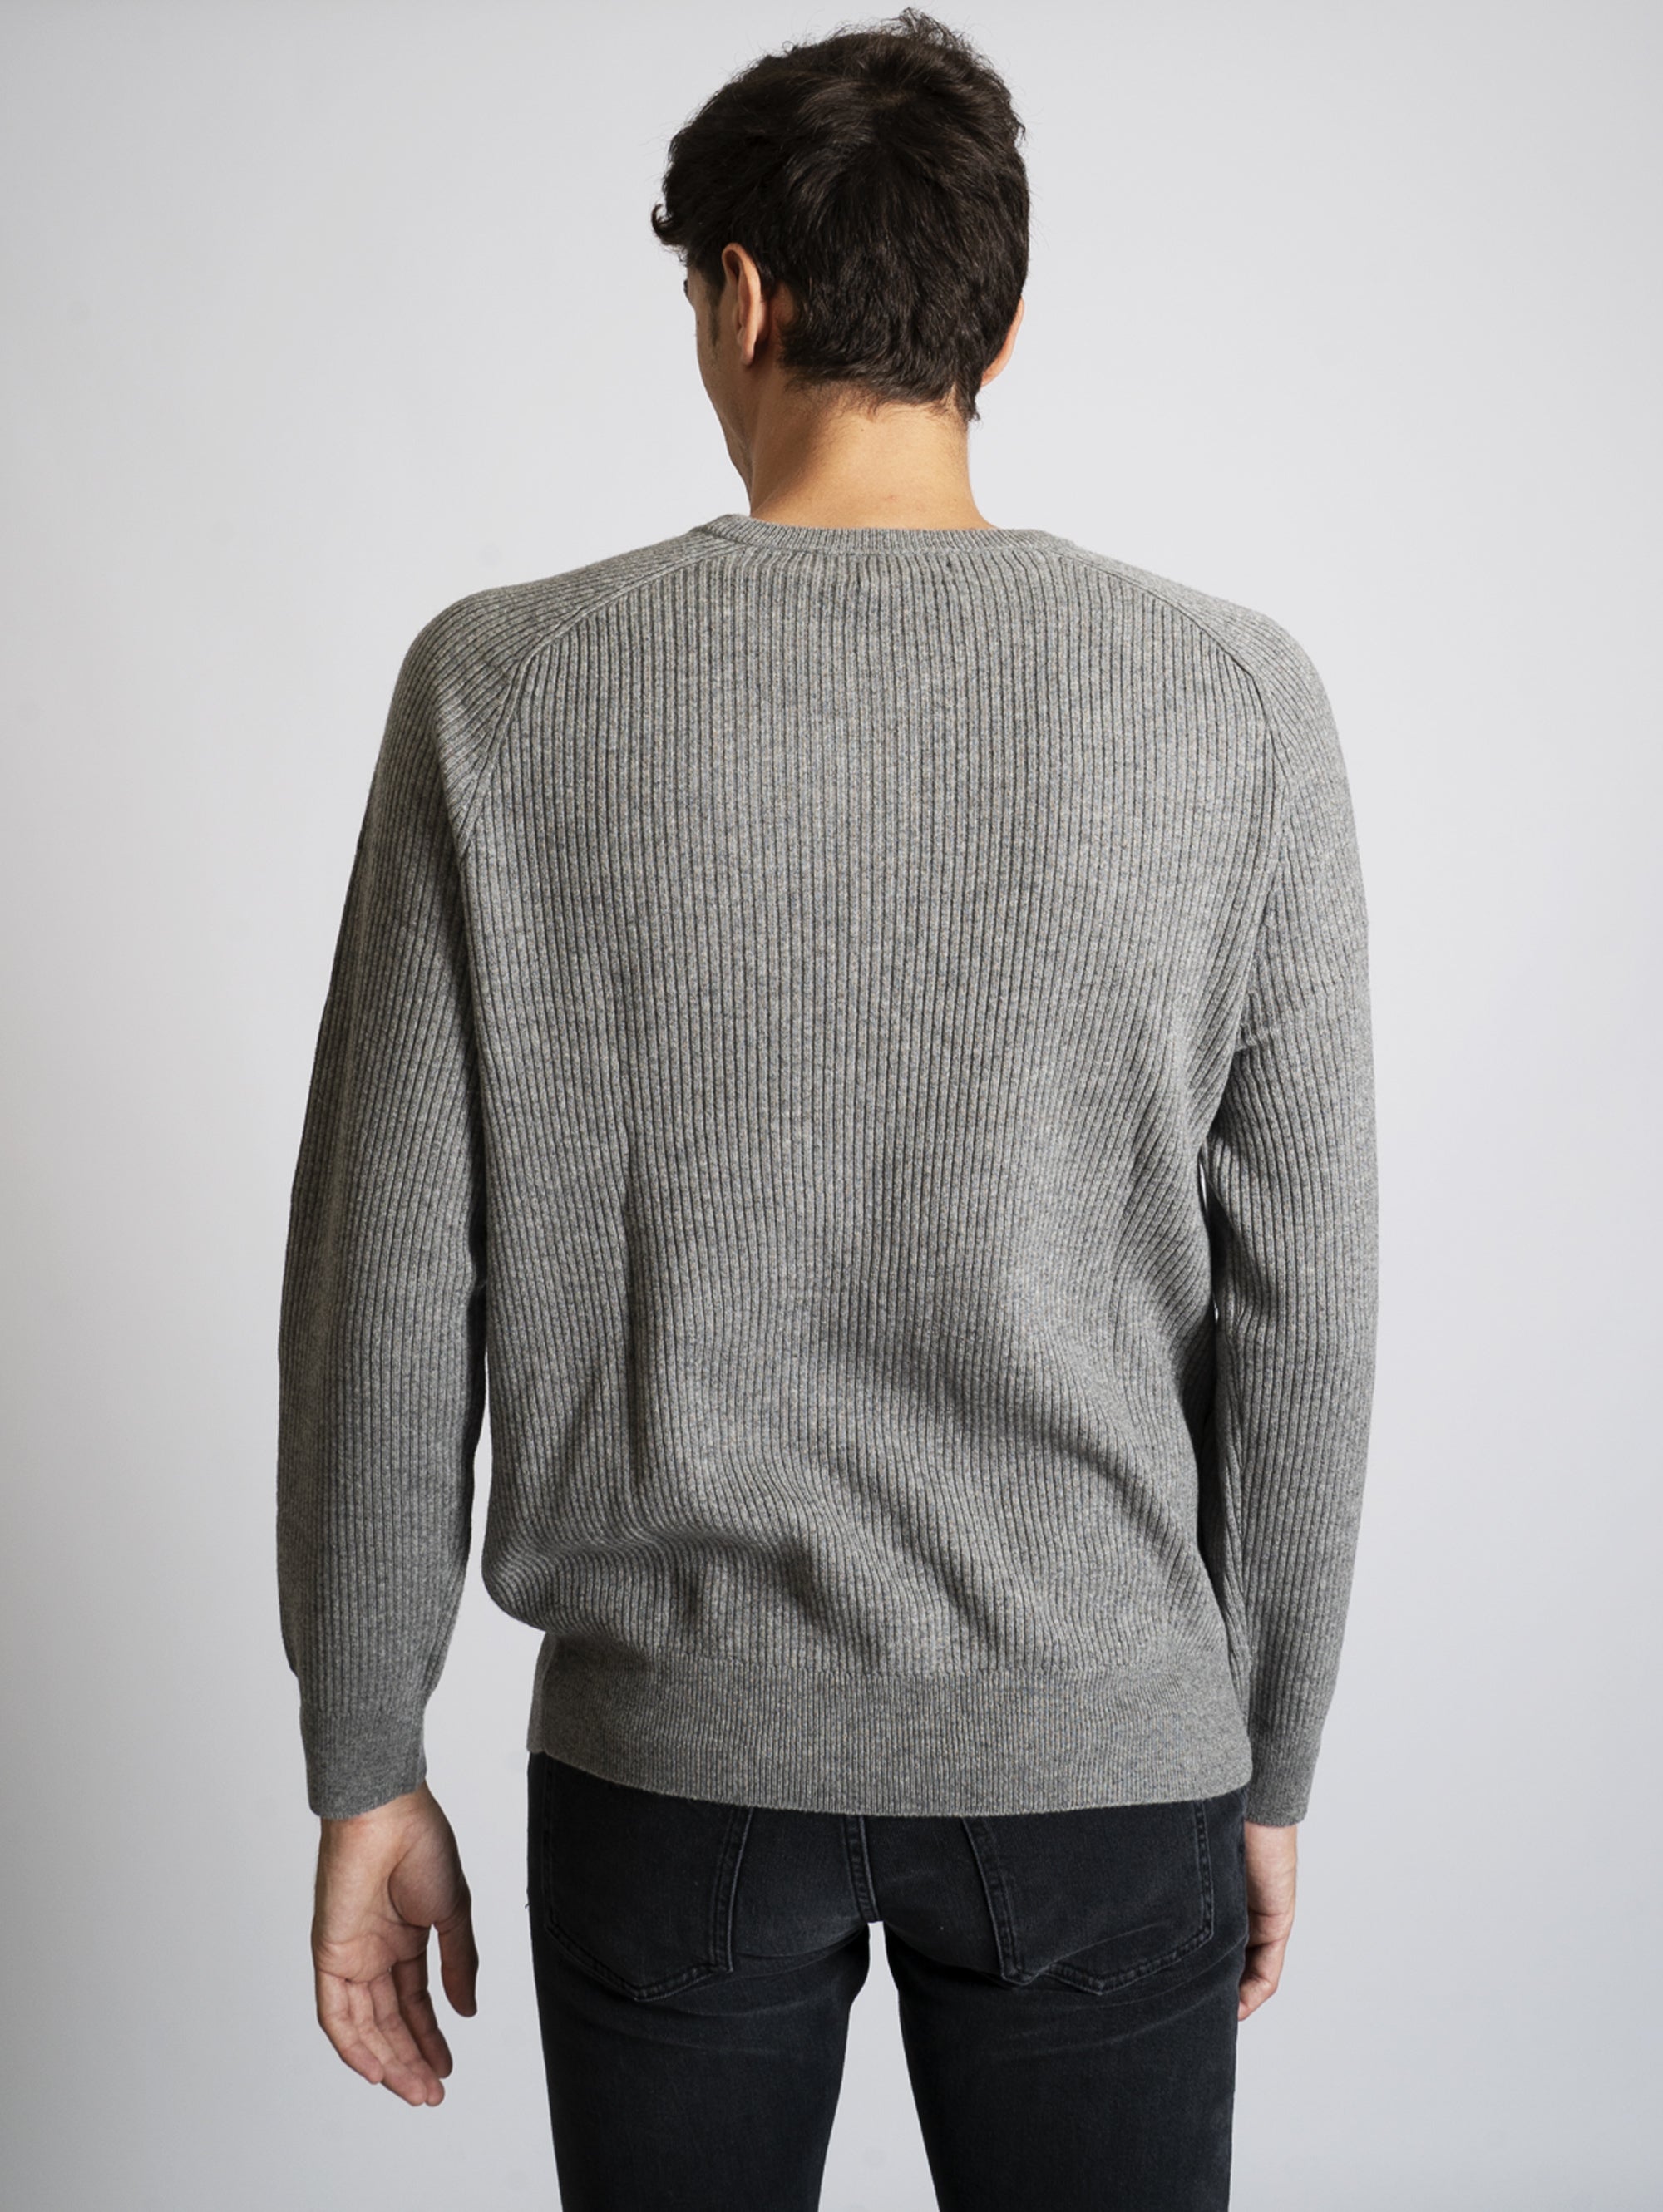 Gray Ribbed Sweater